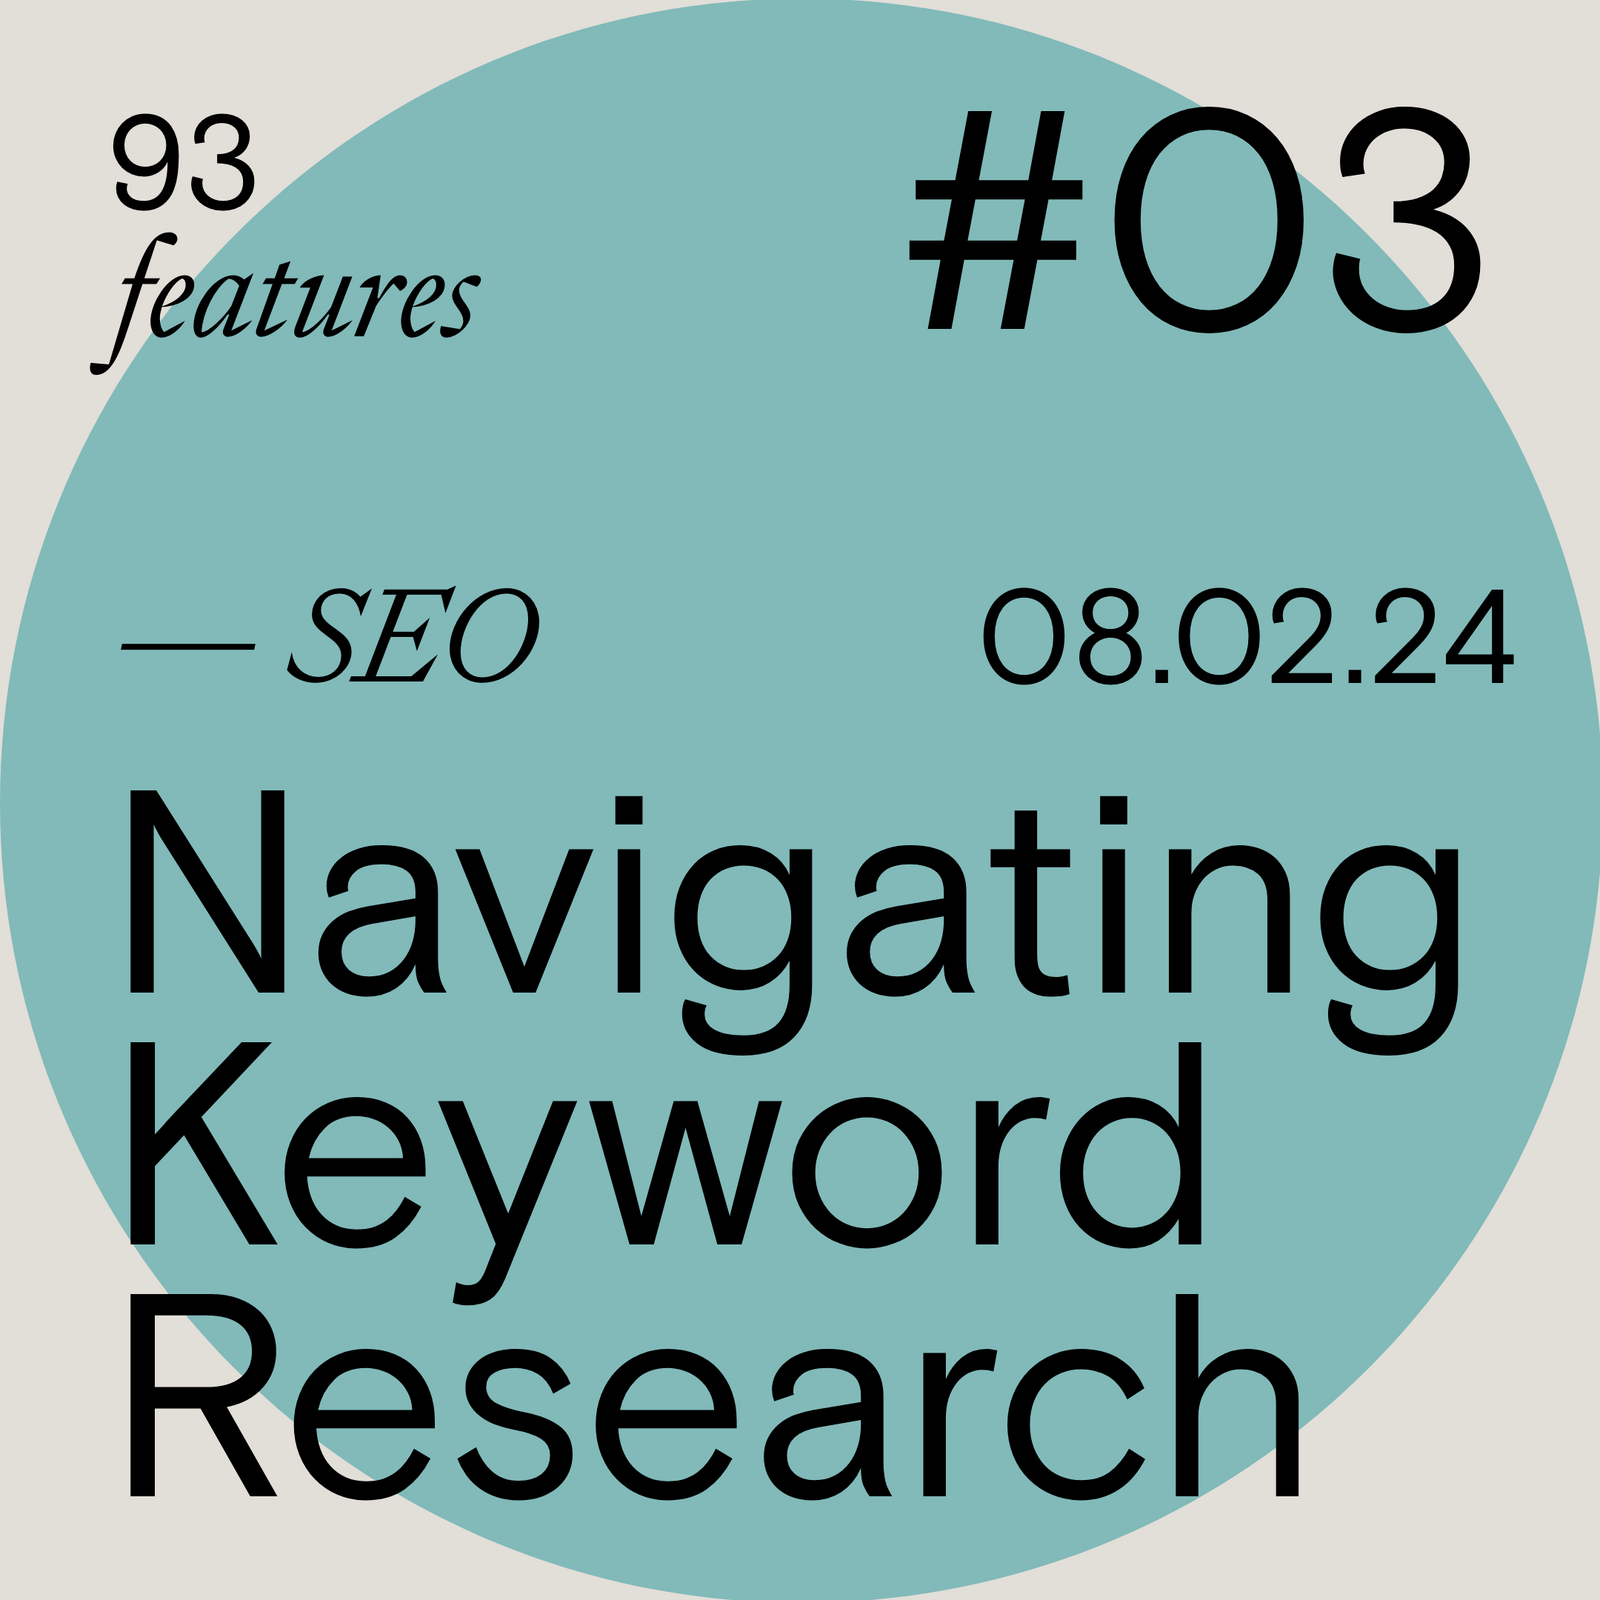 93 features - SEO, Navigating Keyword Research